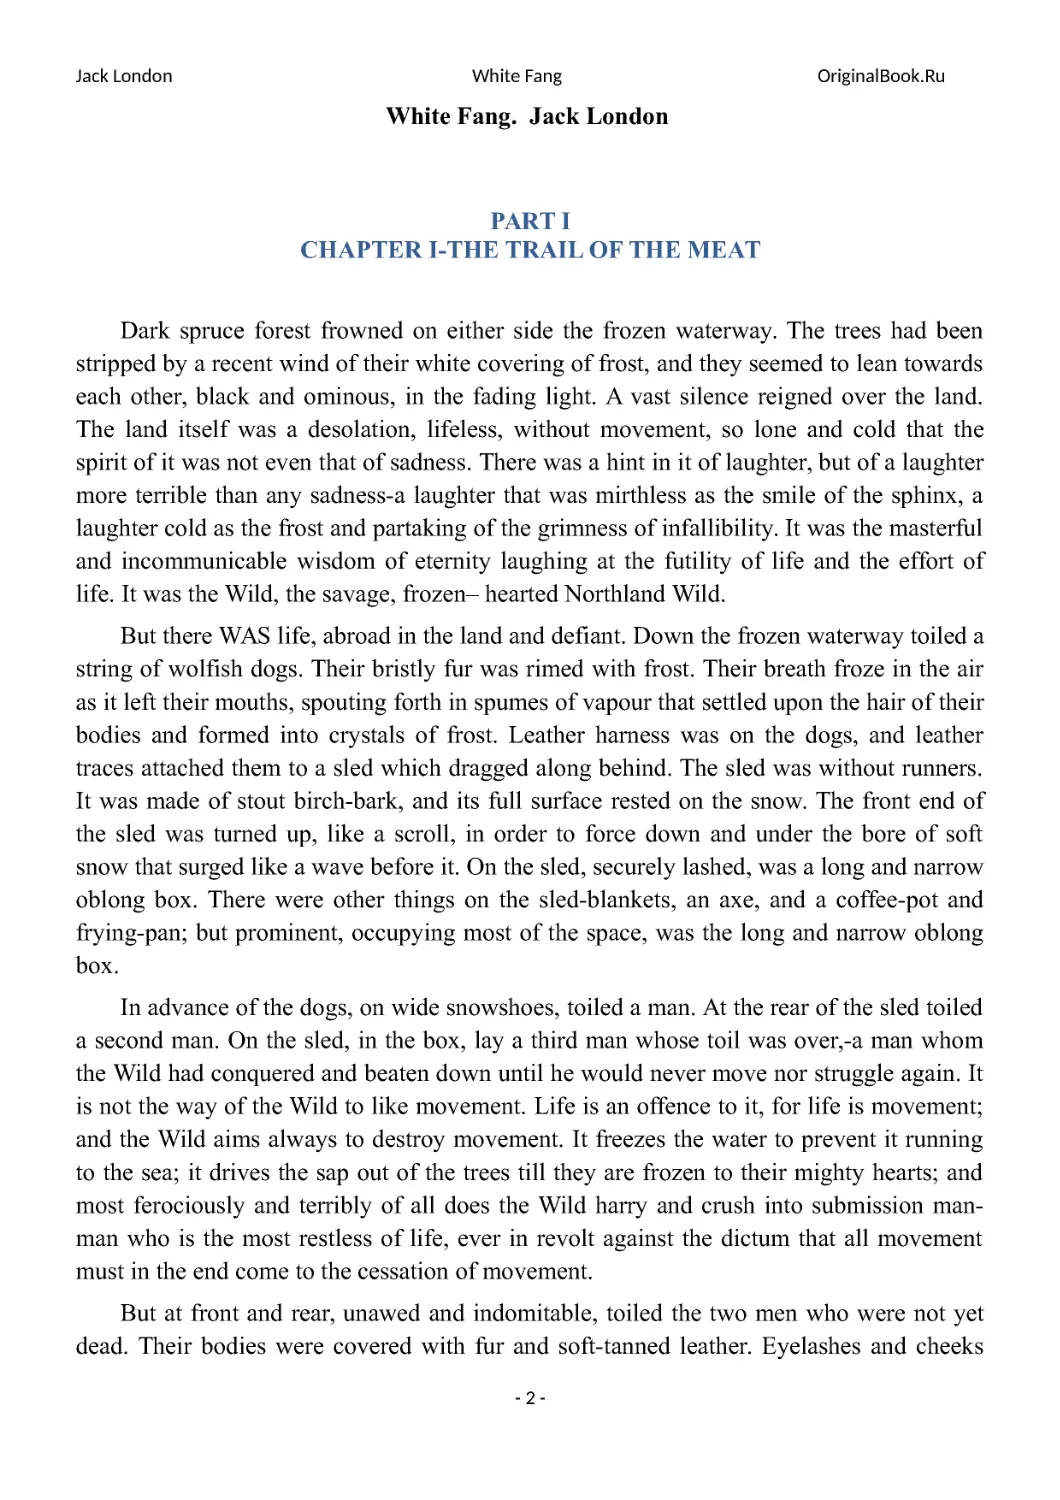 White Fang. Jack London
PART I
CHAPTER I-THE TRAIL OF THE MEAT